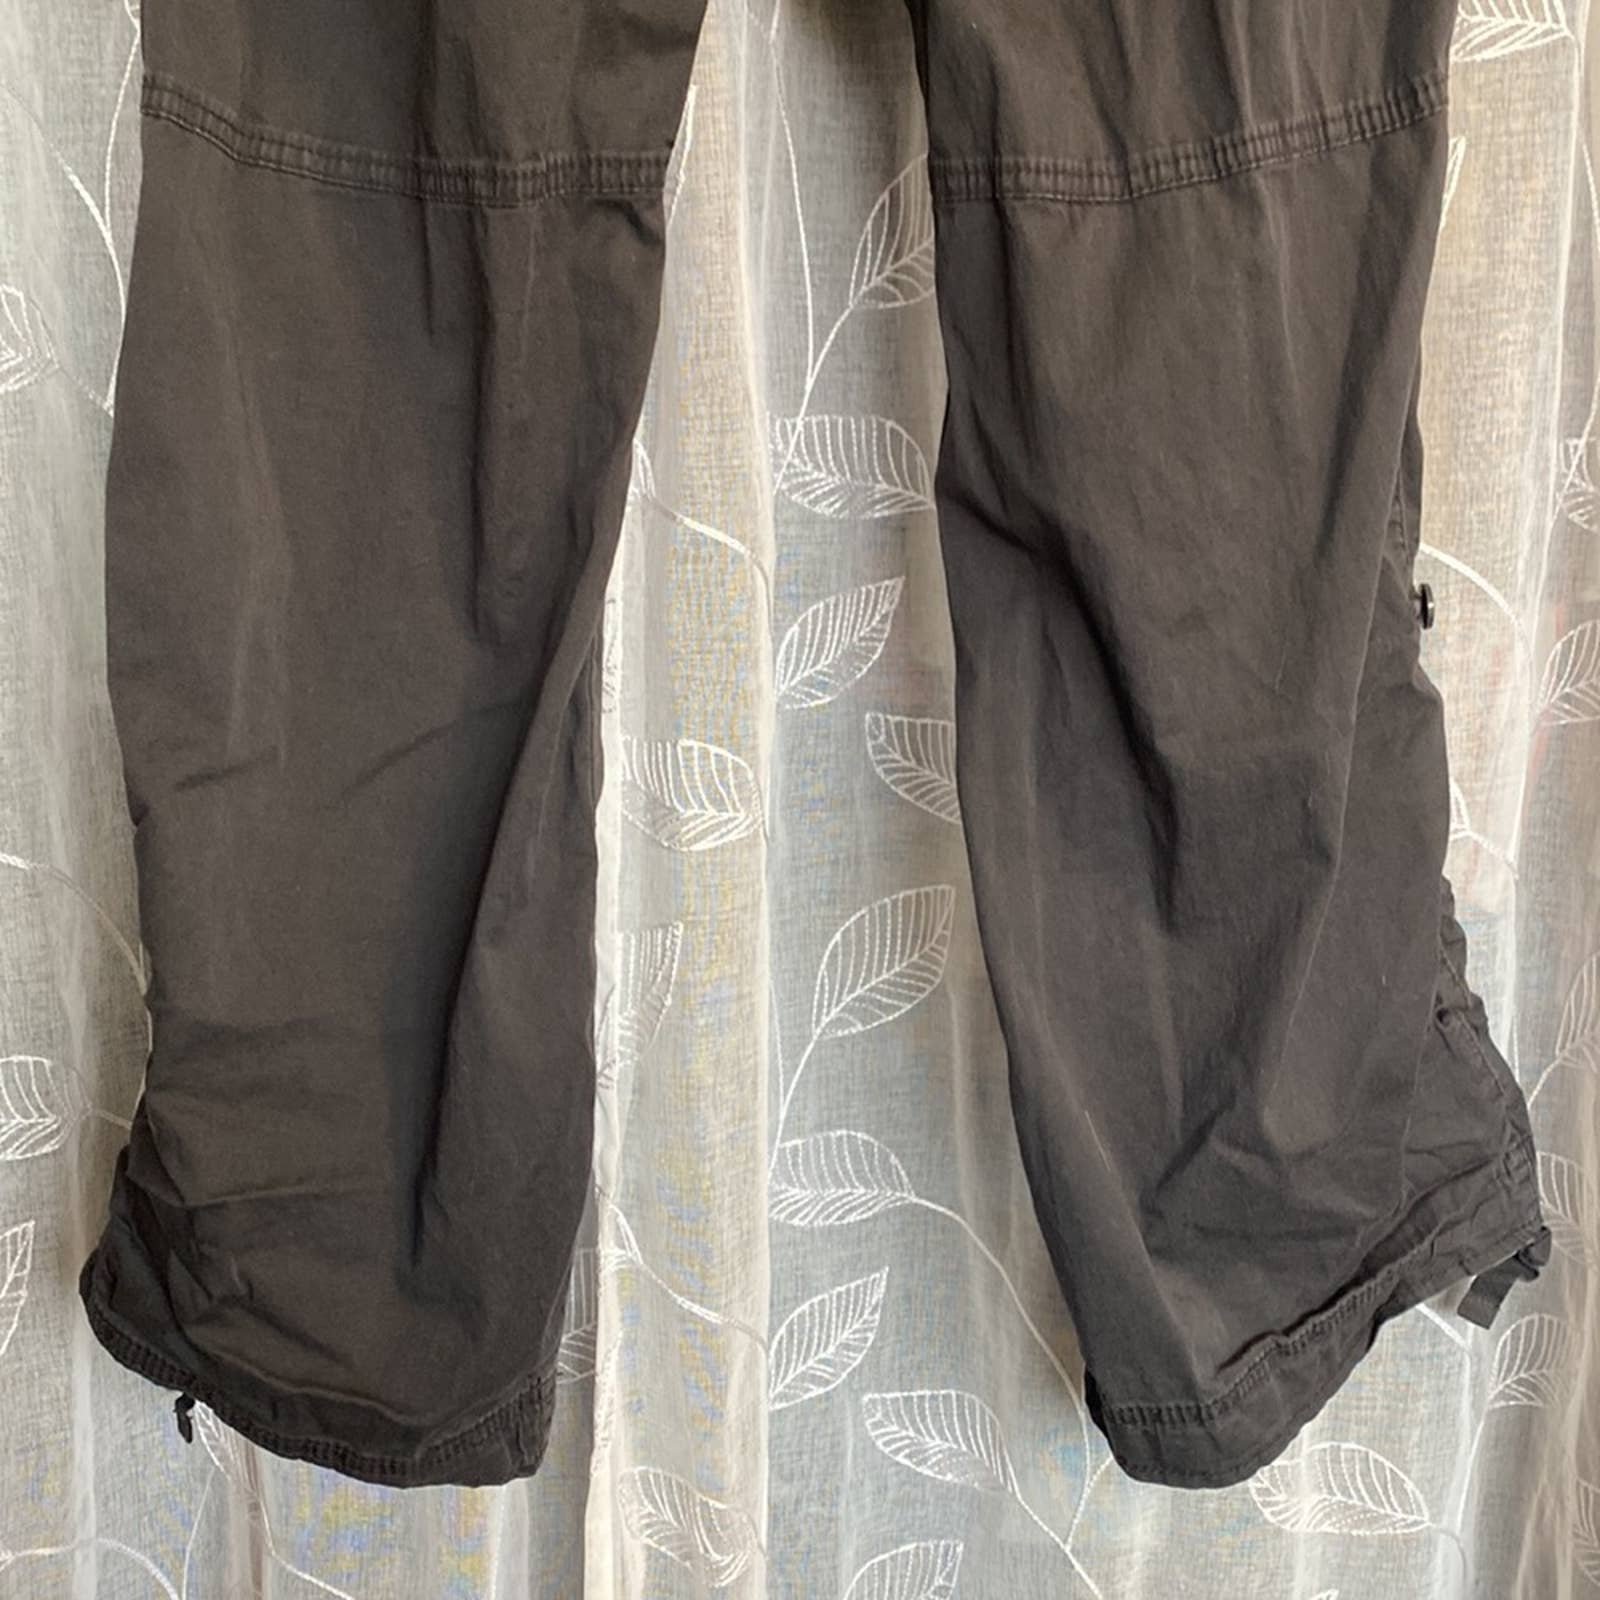 Simple Supplies gray cargo style pants drawstring waist Capri to full length pant pS00NnMU2 US Outlet